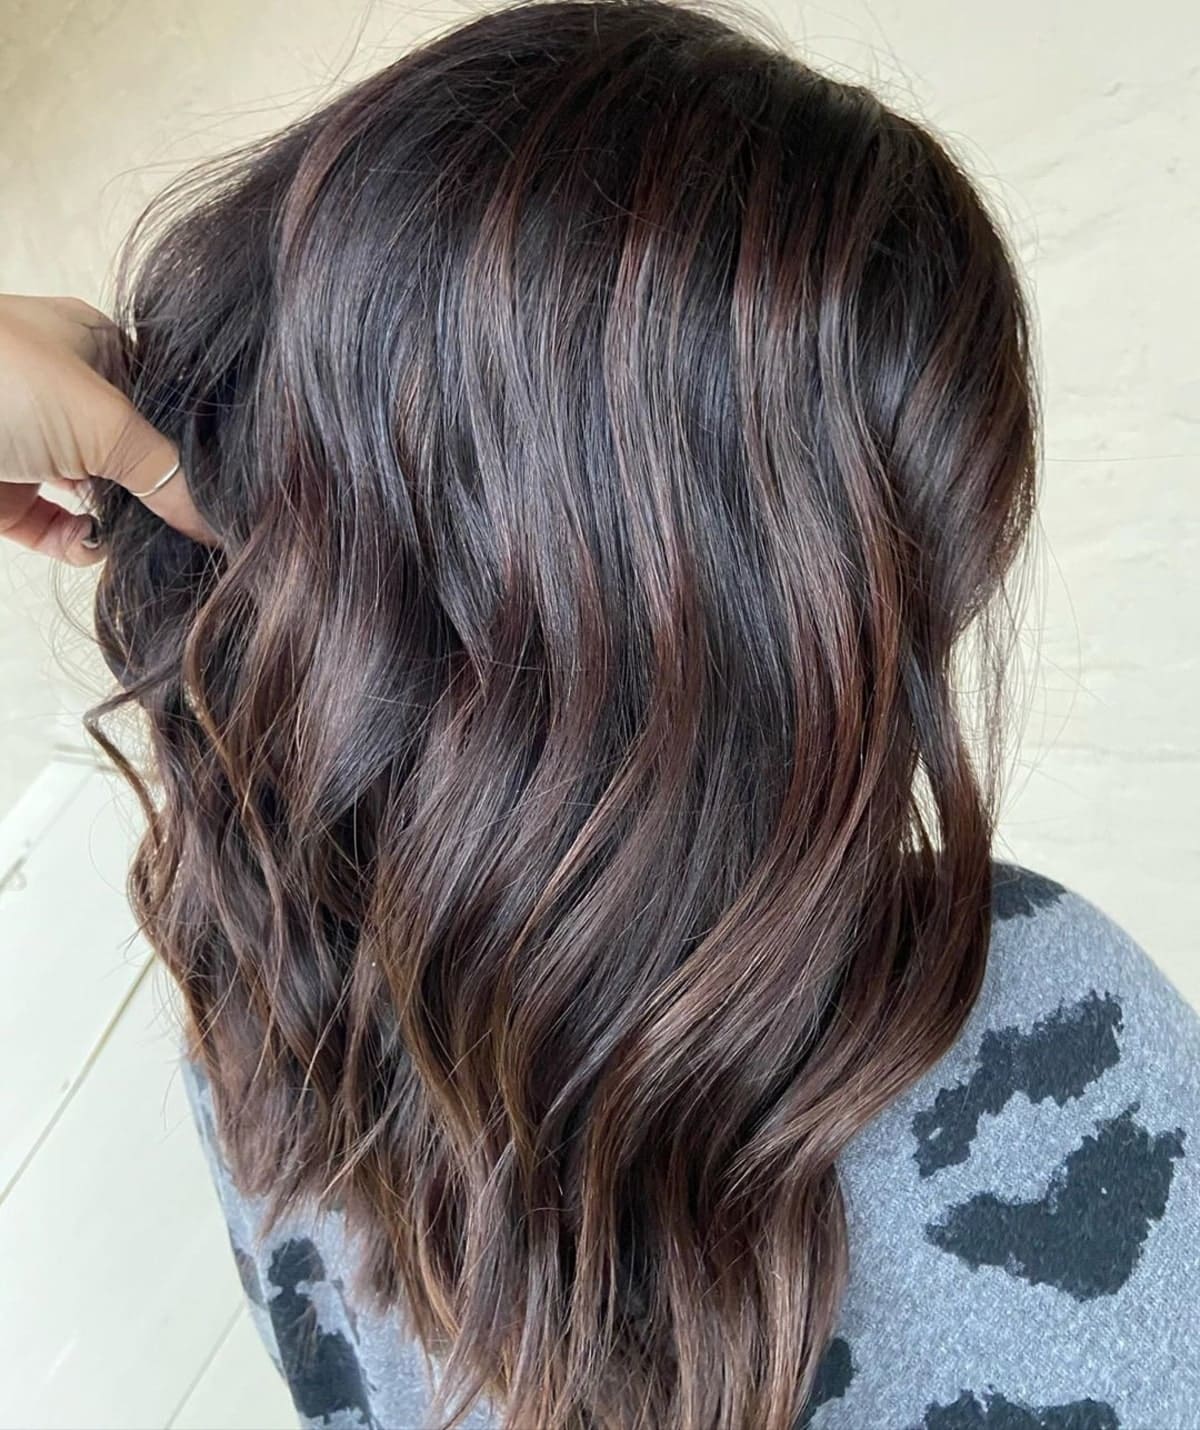 Delicious chocolate brown highlights on black hair